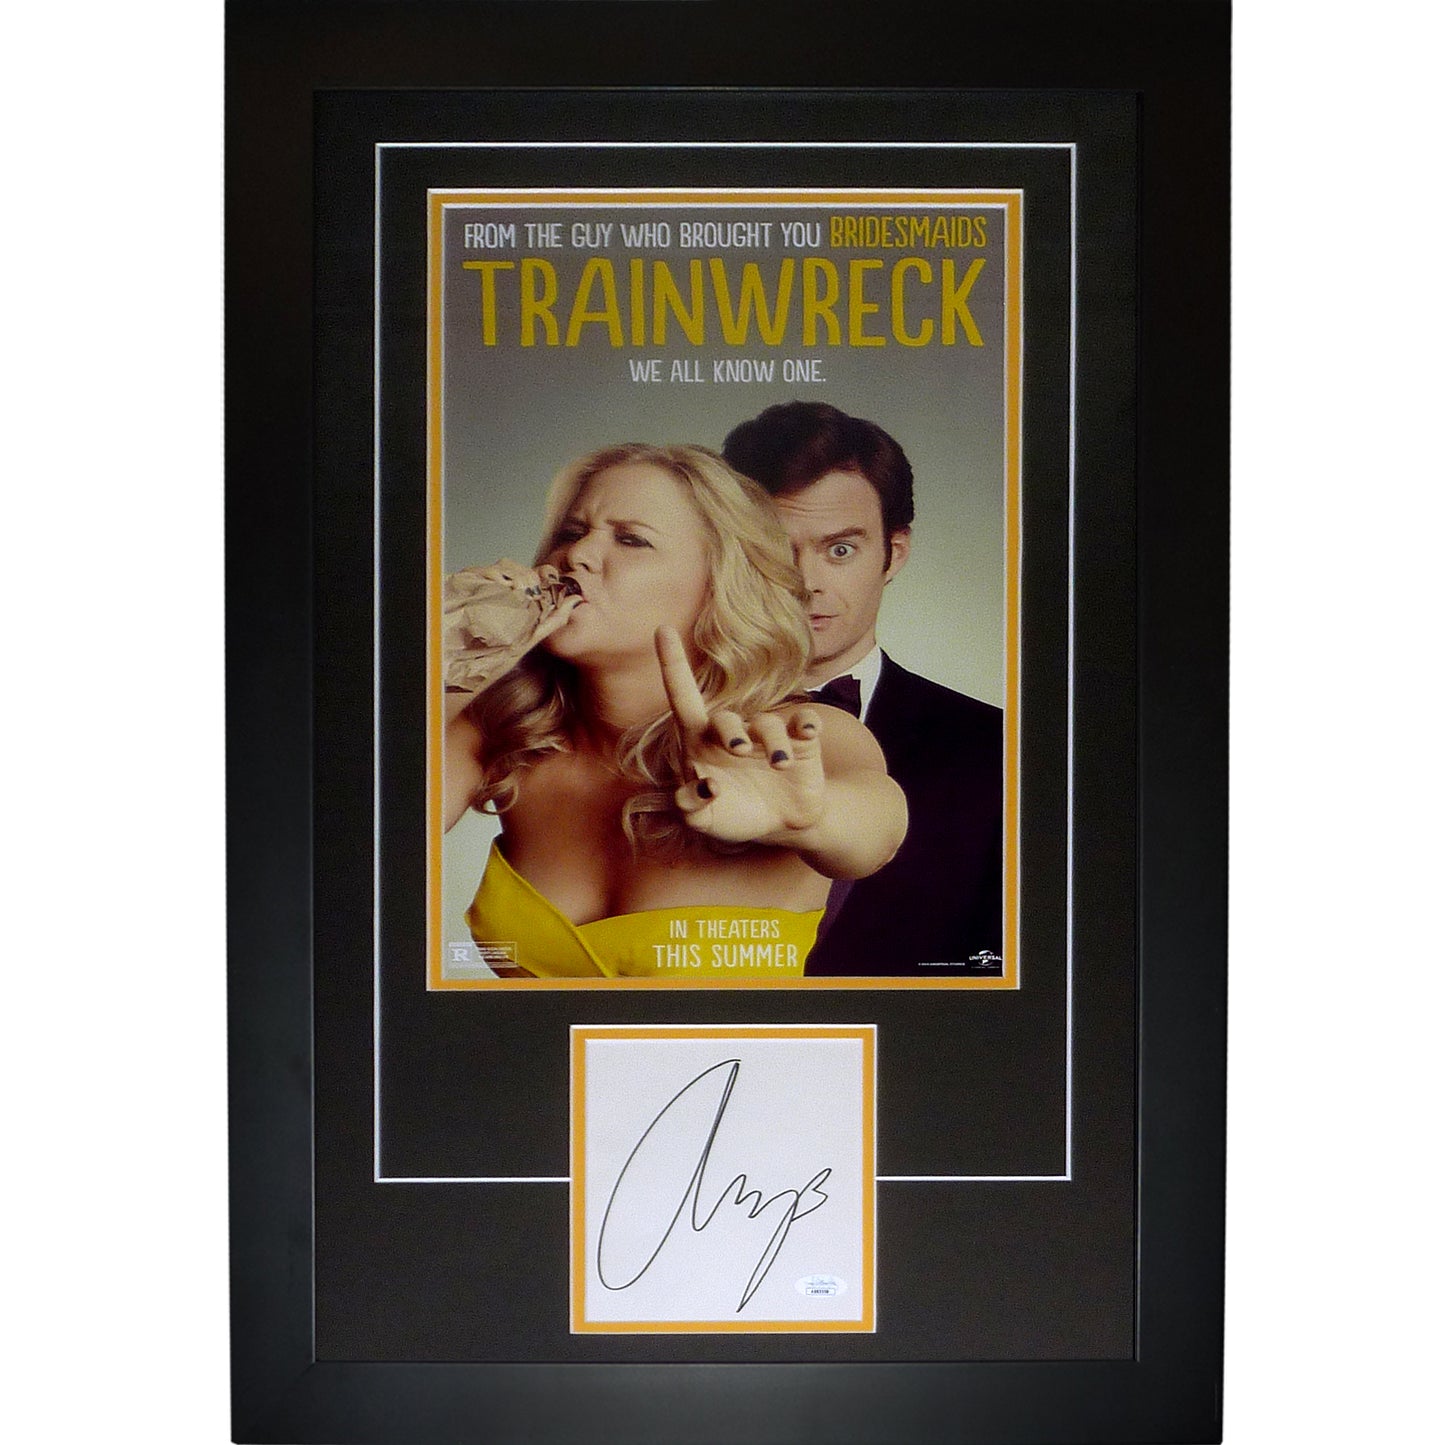 Trainwreck 11x17 Movie Poster Deluxe Framed with Amy Schumer Autograph - JSA